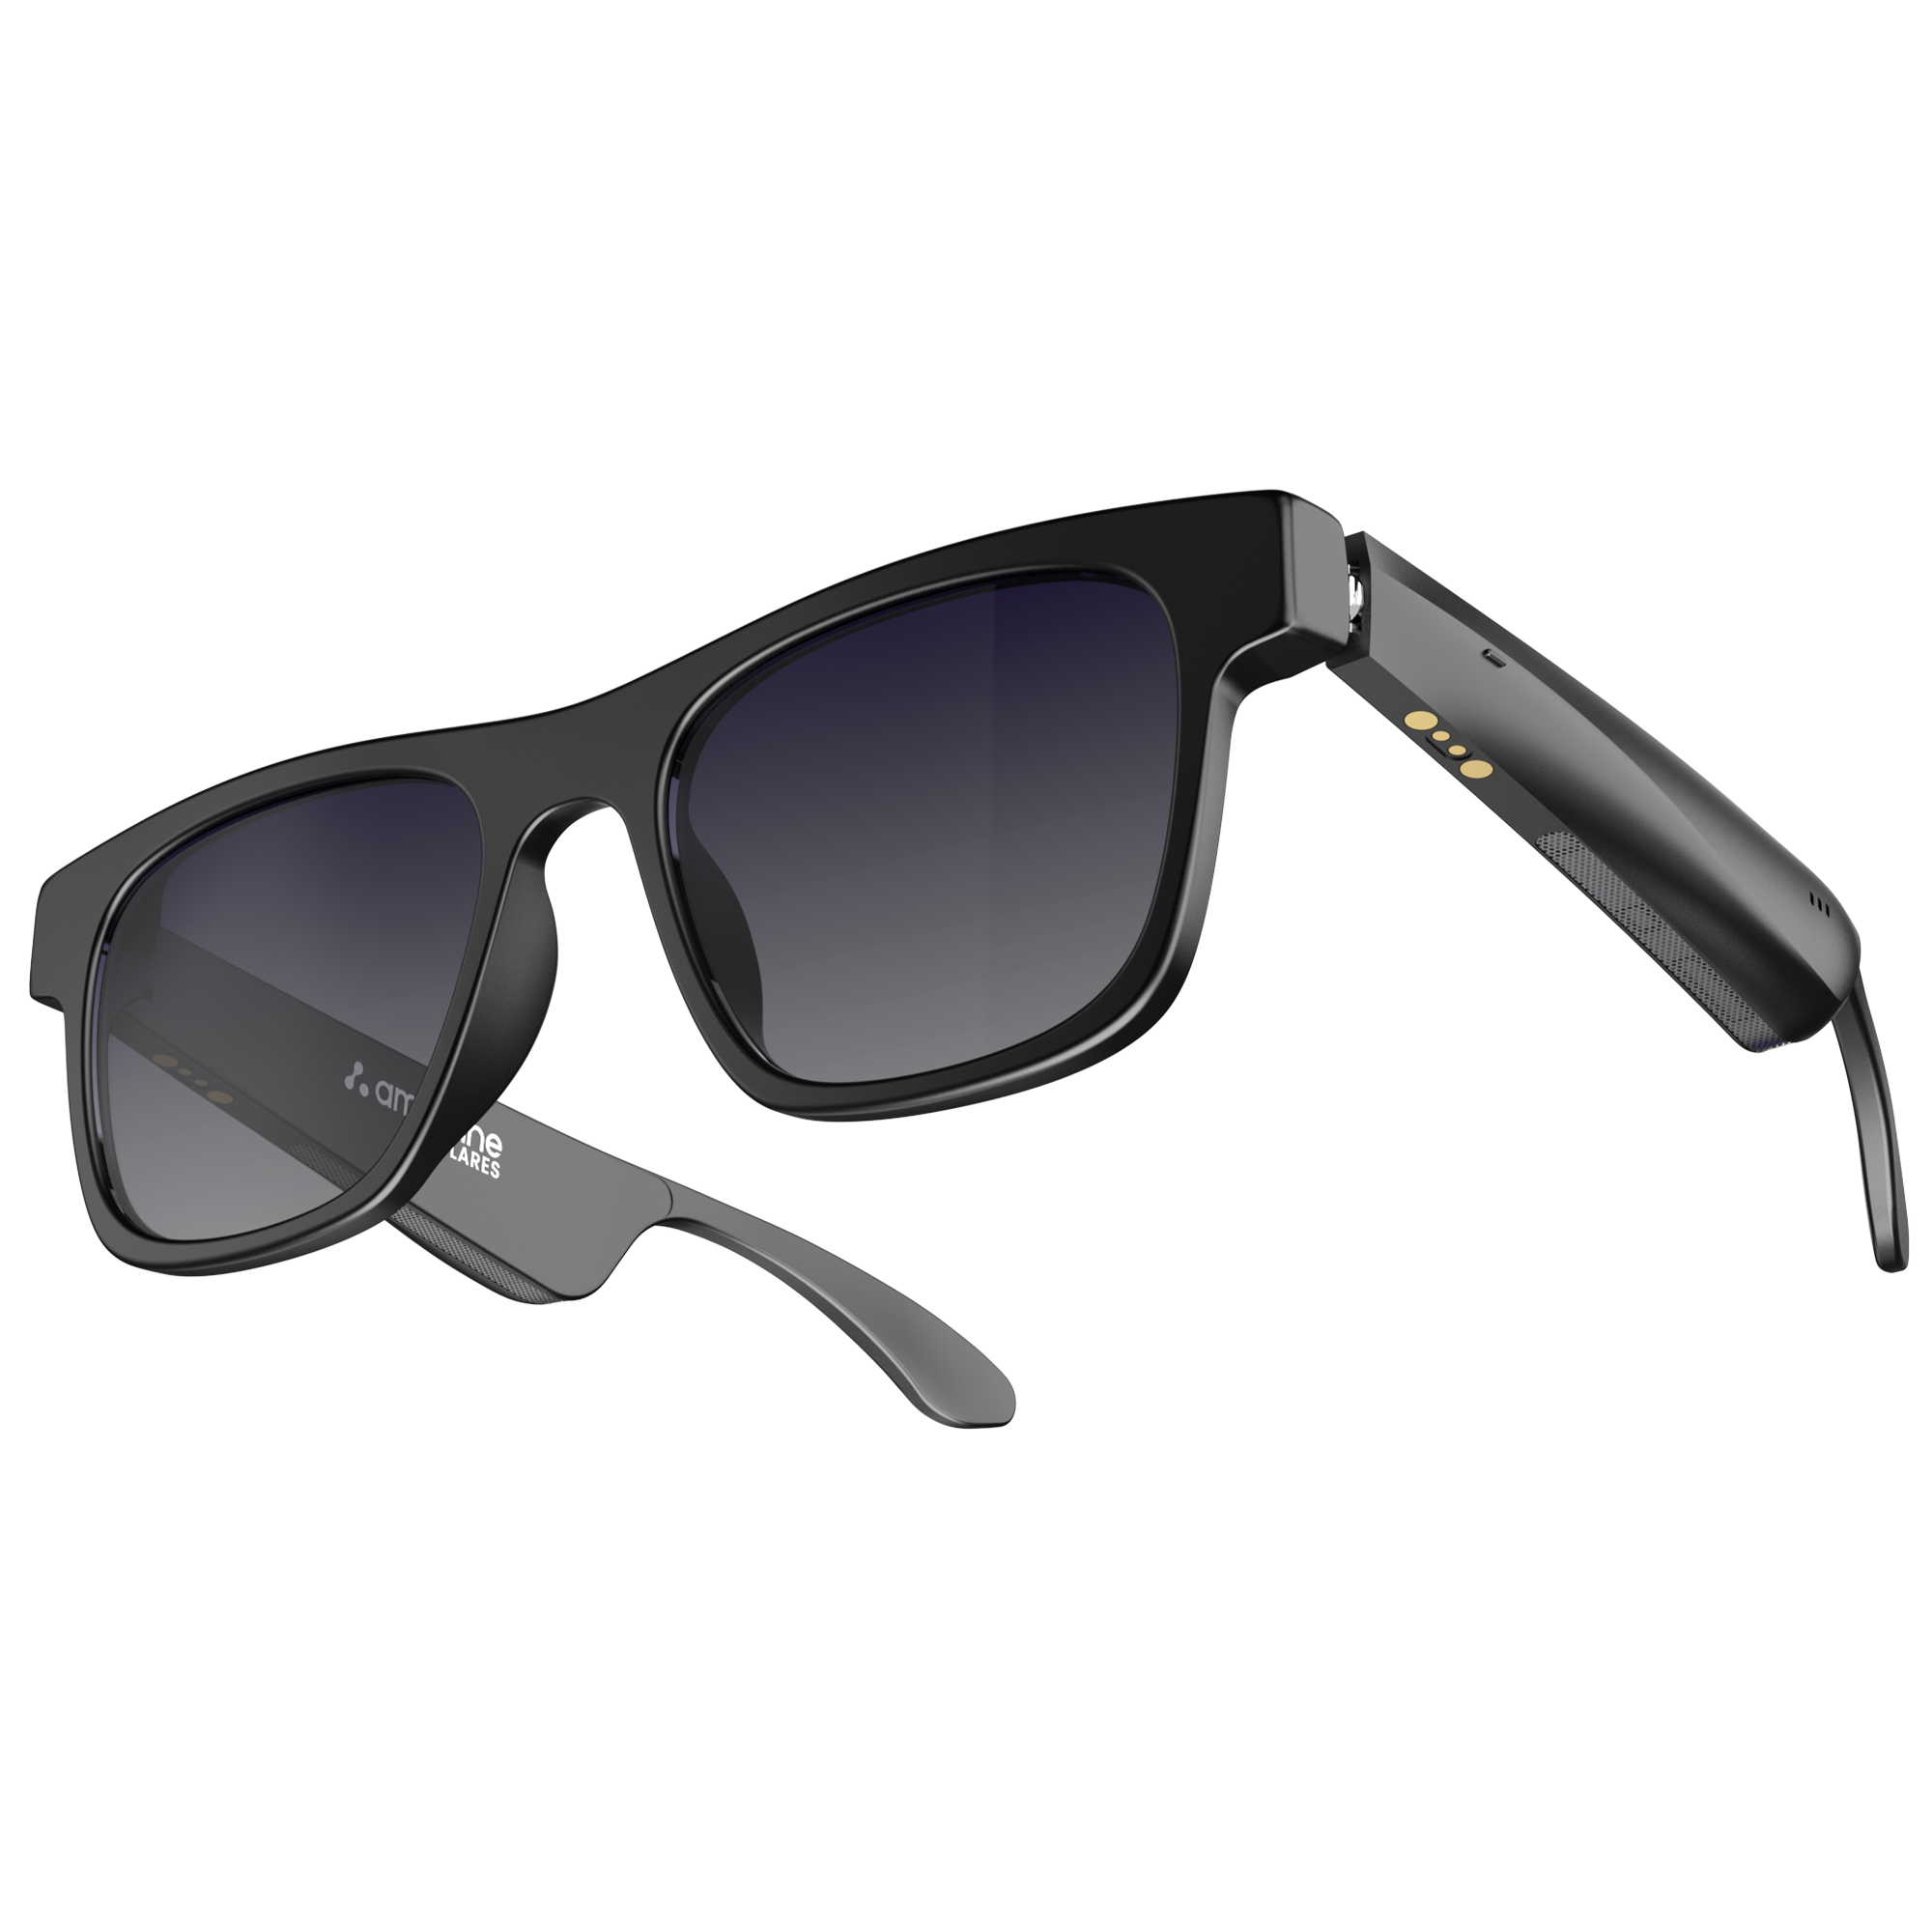 Buy Fastrack Sunglasses Online at Best Price